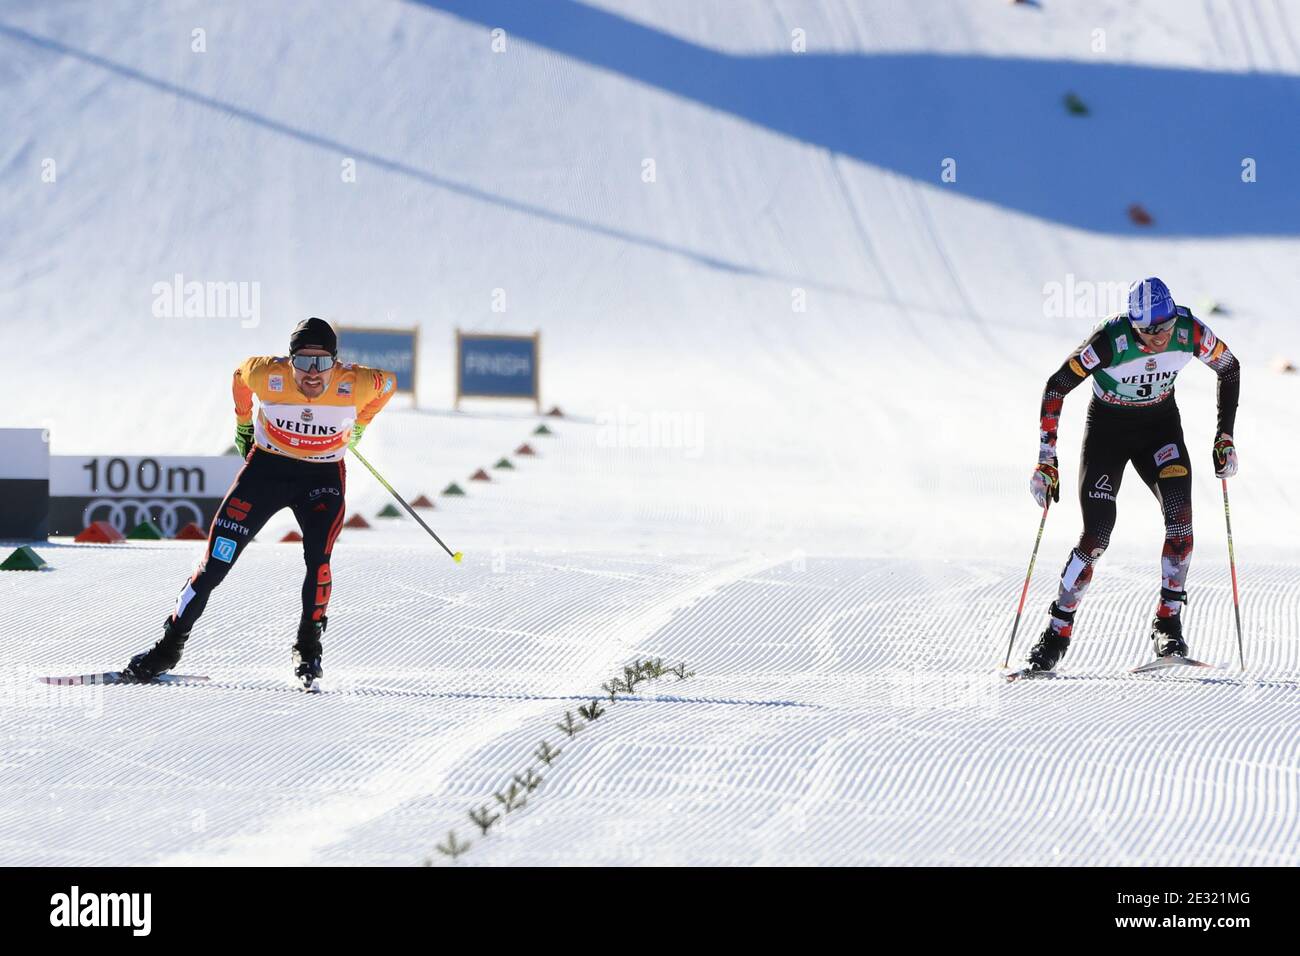 Val Di Fiemme, Trentino, Italien. 16. Januar 2021; Val Di Fiemme, Predazzo, Trentino, Italien; International Ski Federation Nordic Combined Team Sprint World Cup, Fabian Riessle (GER) und Johannes Lamparter (AUT) im Ziel Credit: Action Plus Sports Images/Alamy Live News Stockfoto